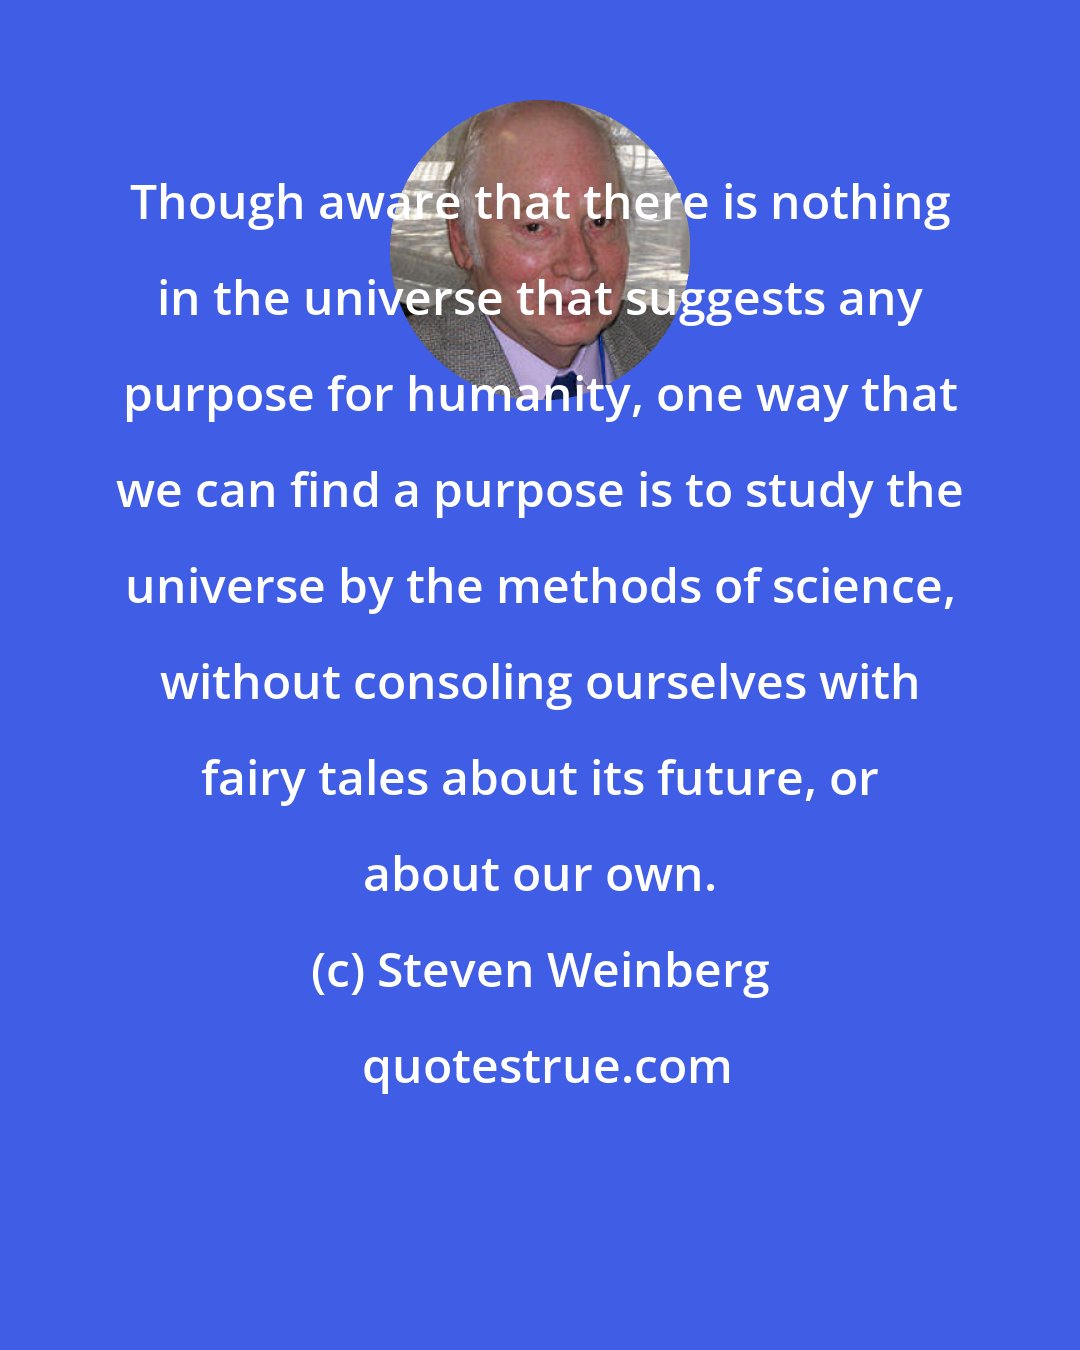 Steven Weinberg: Though aware that there is nothing in the universe that suggests any purpose for humanity, one way that we can find a purpose is to study the universe by the methods of science, without consoling ourselves with fairy tales about its future, or about our own.